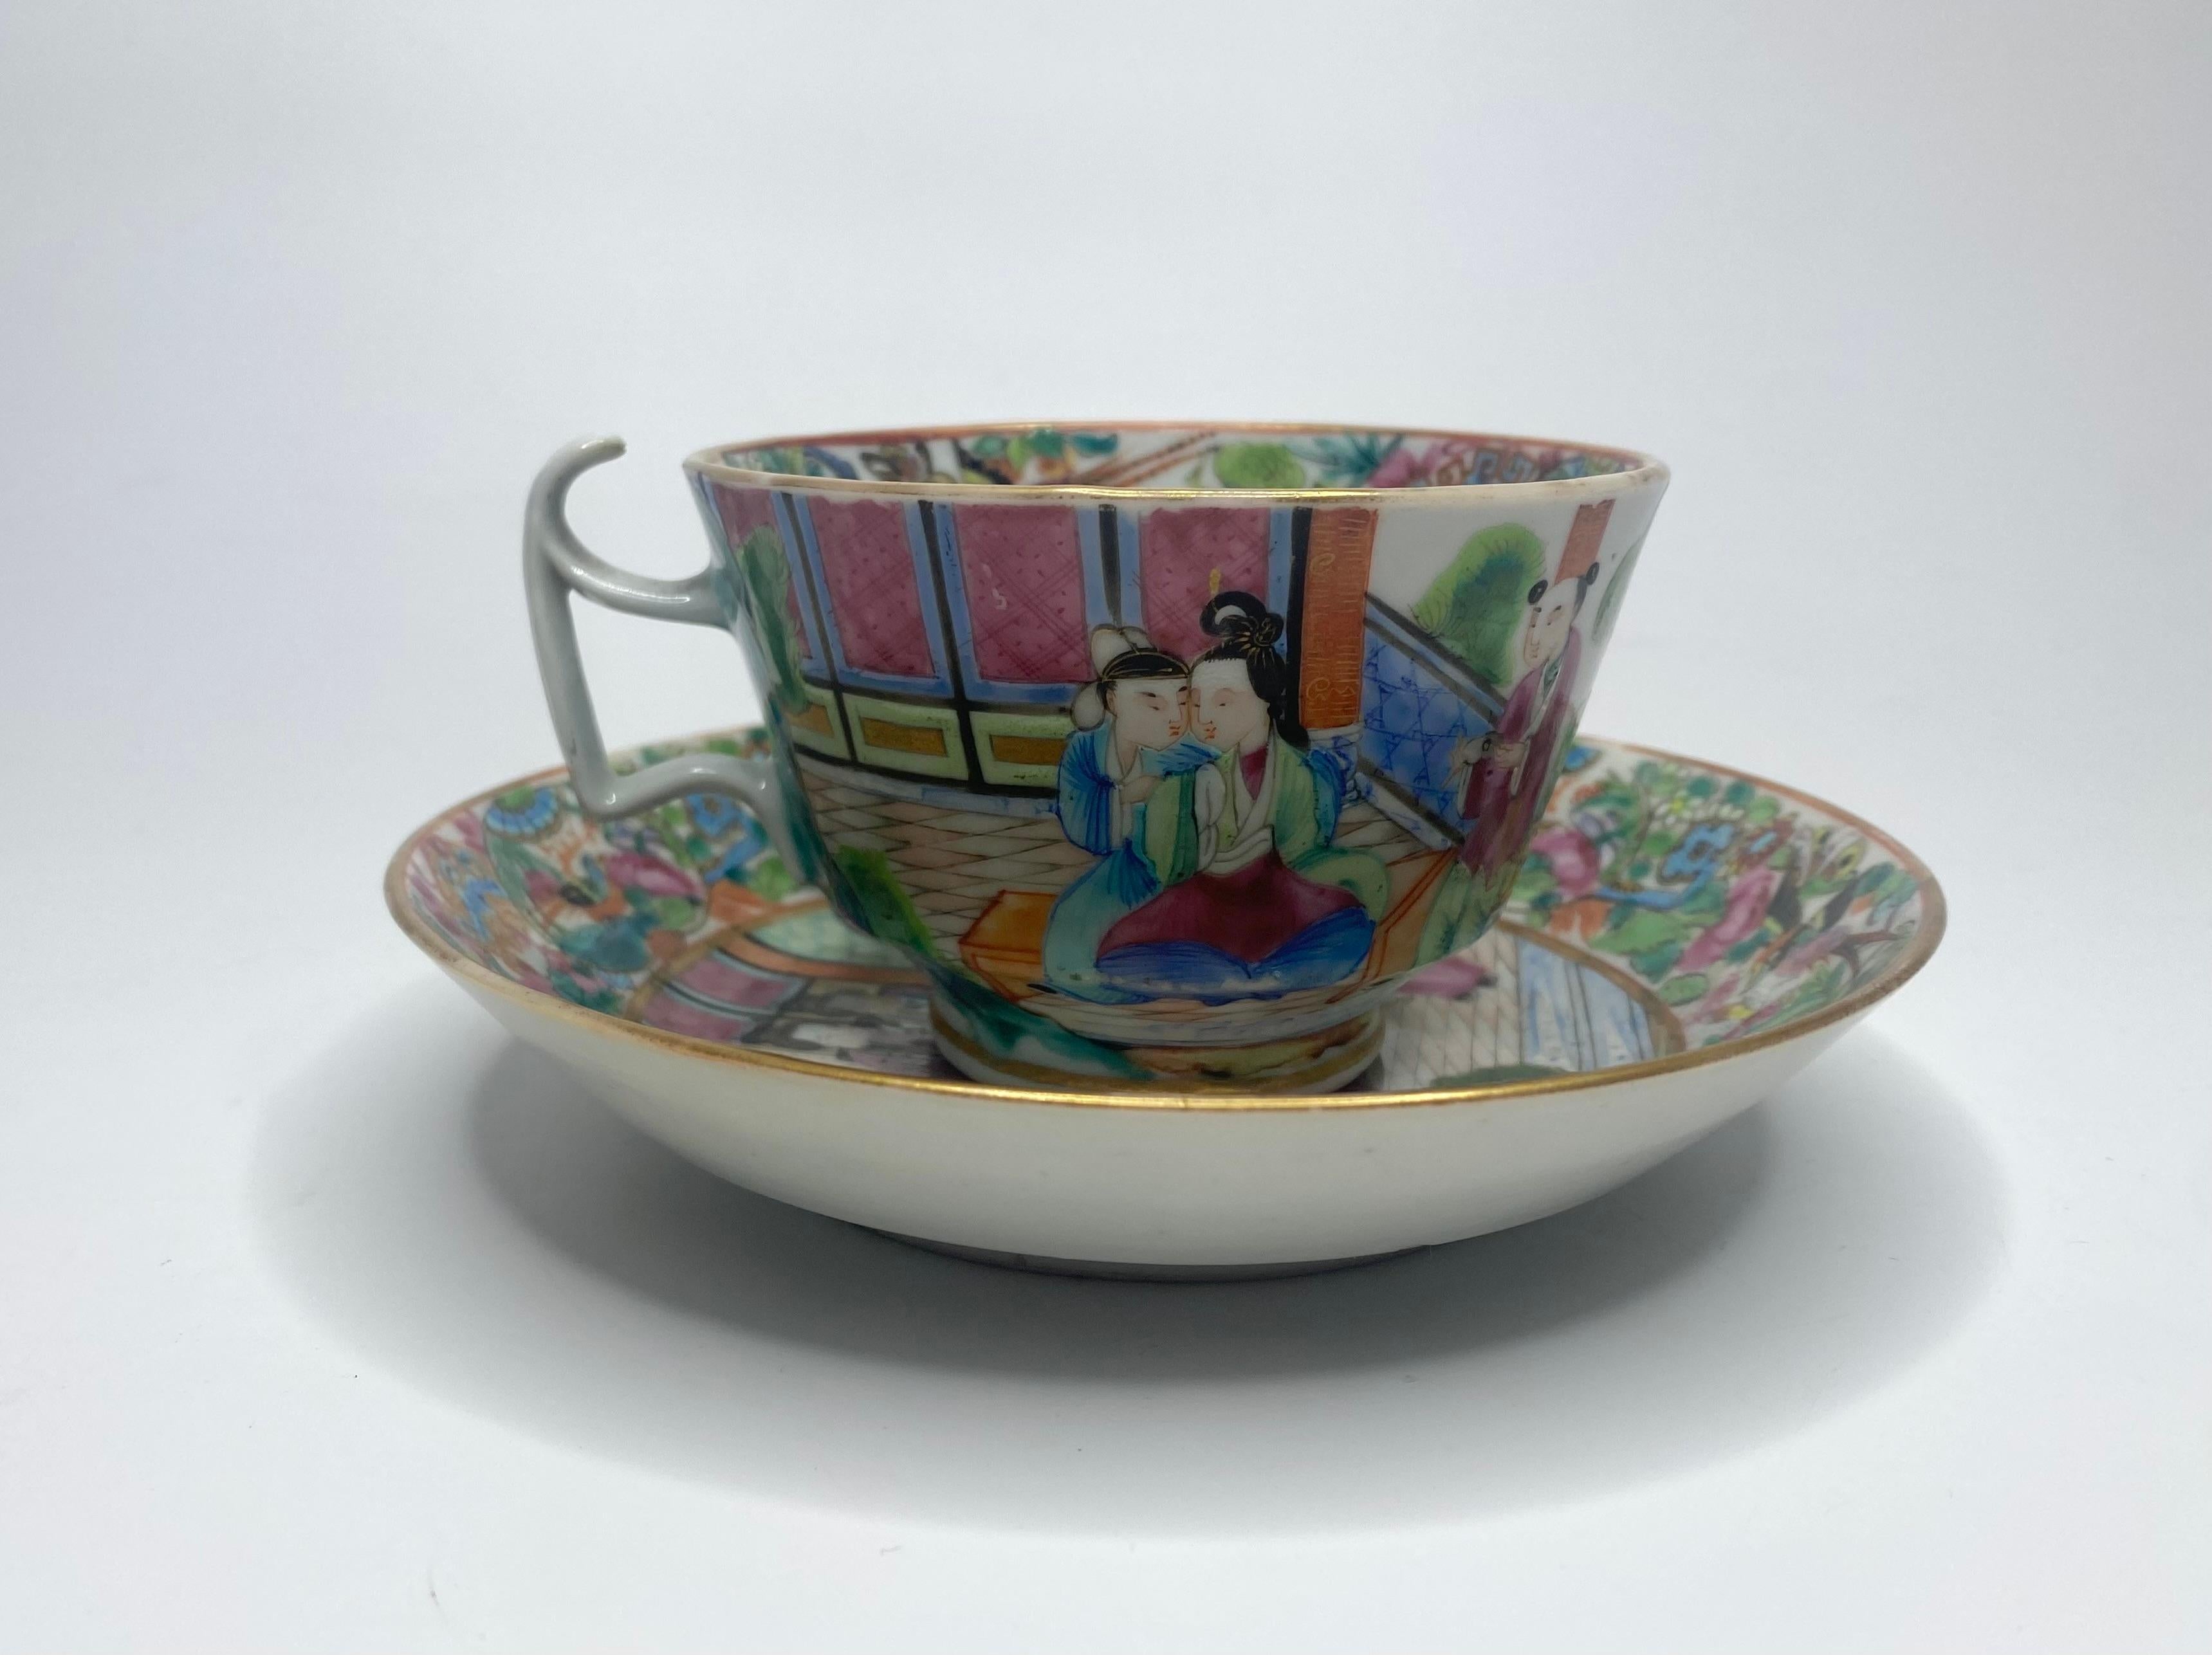 Porcelain Chinese Canton porcelain cup & saucer, c. 1850. Qing dynasty.